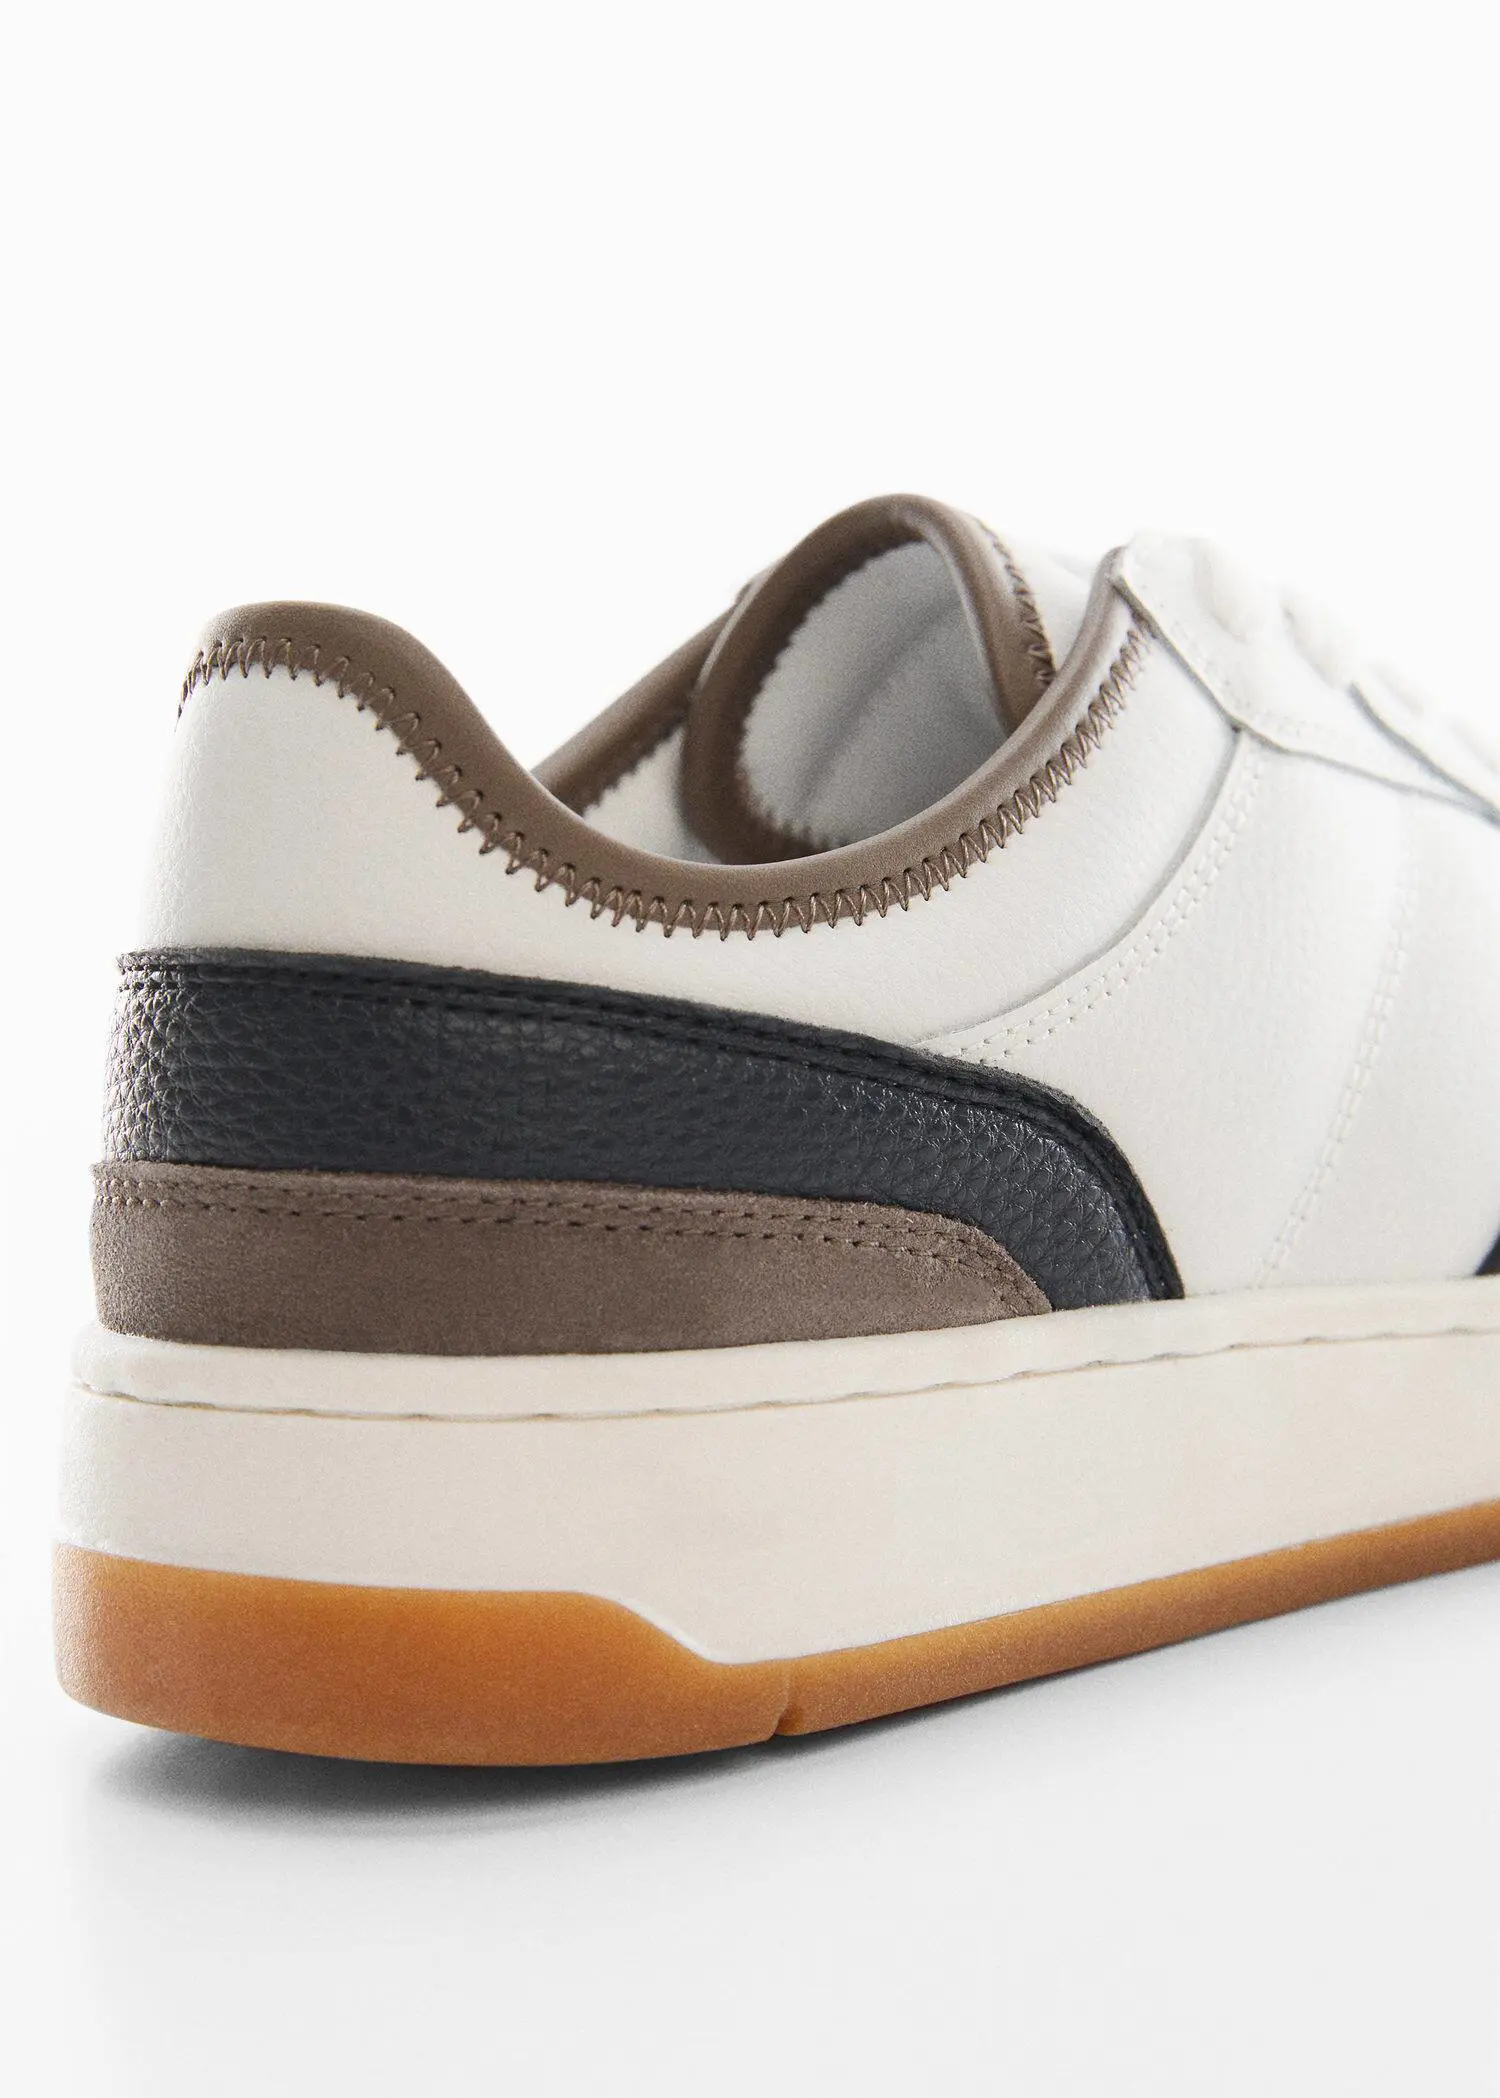 Mango Combined leather sneakers. 3